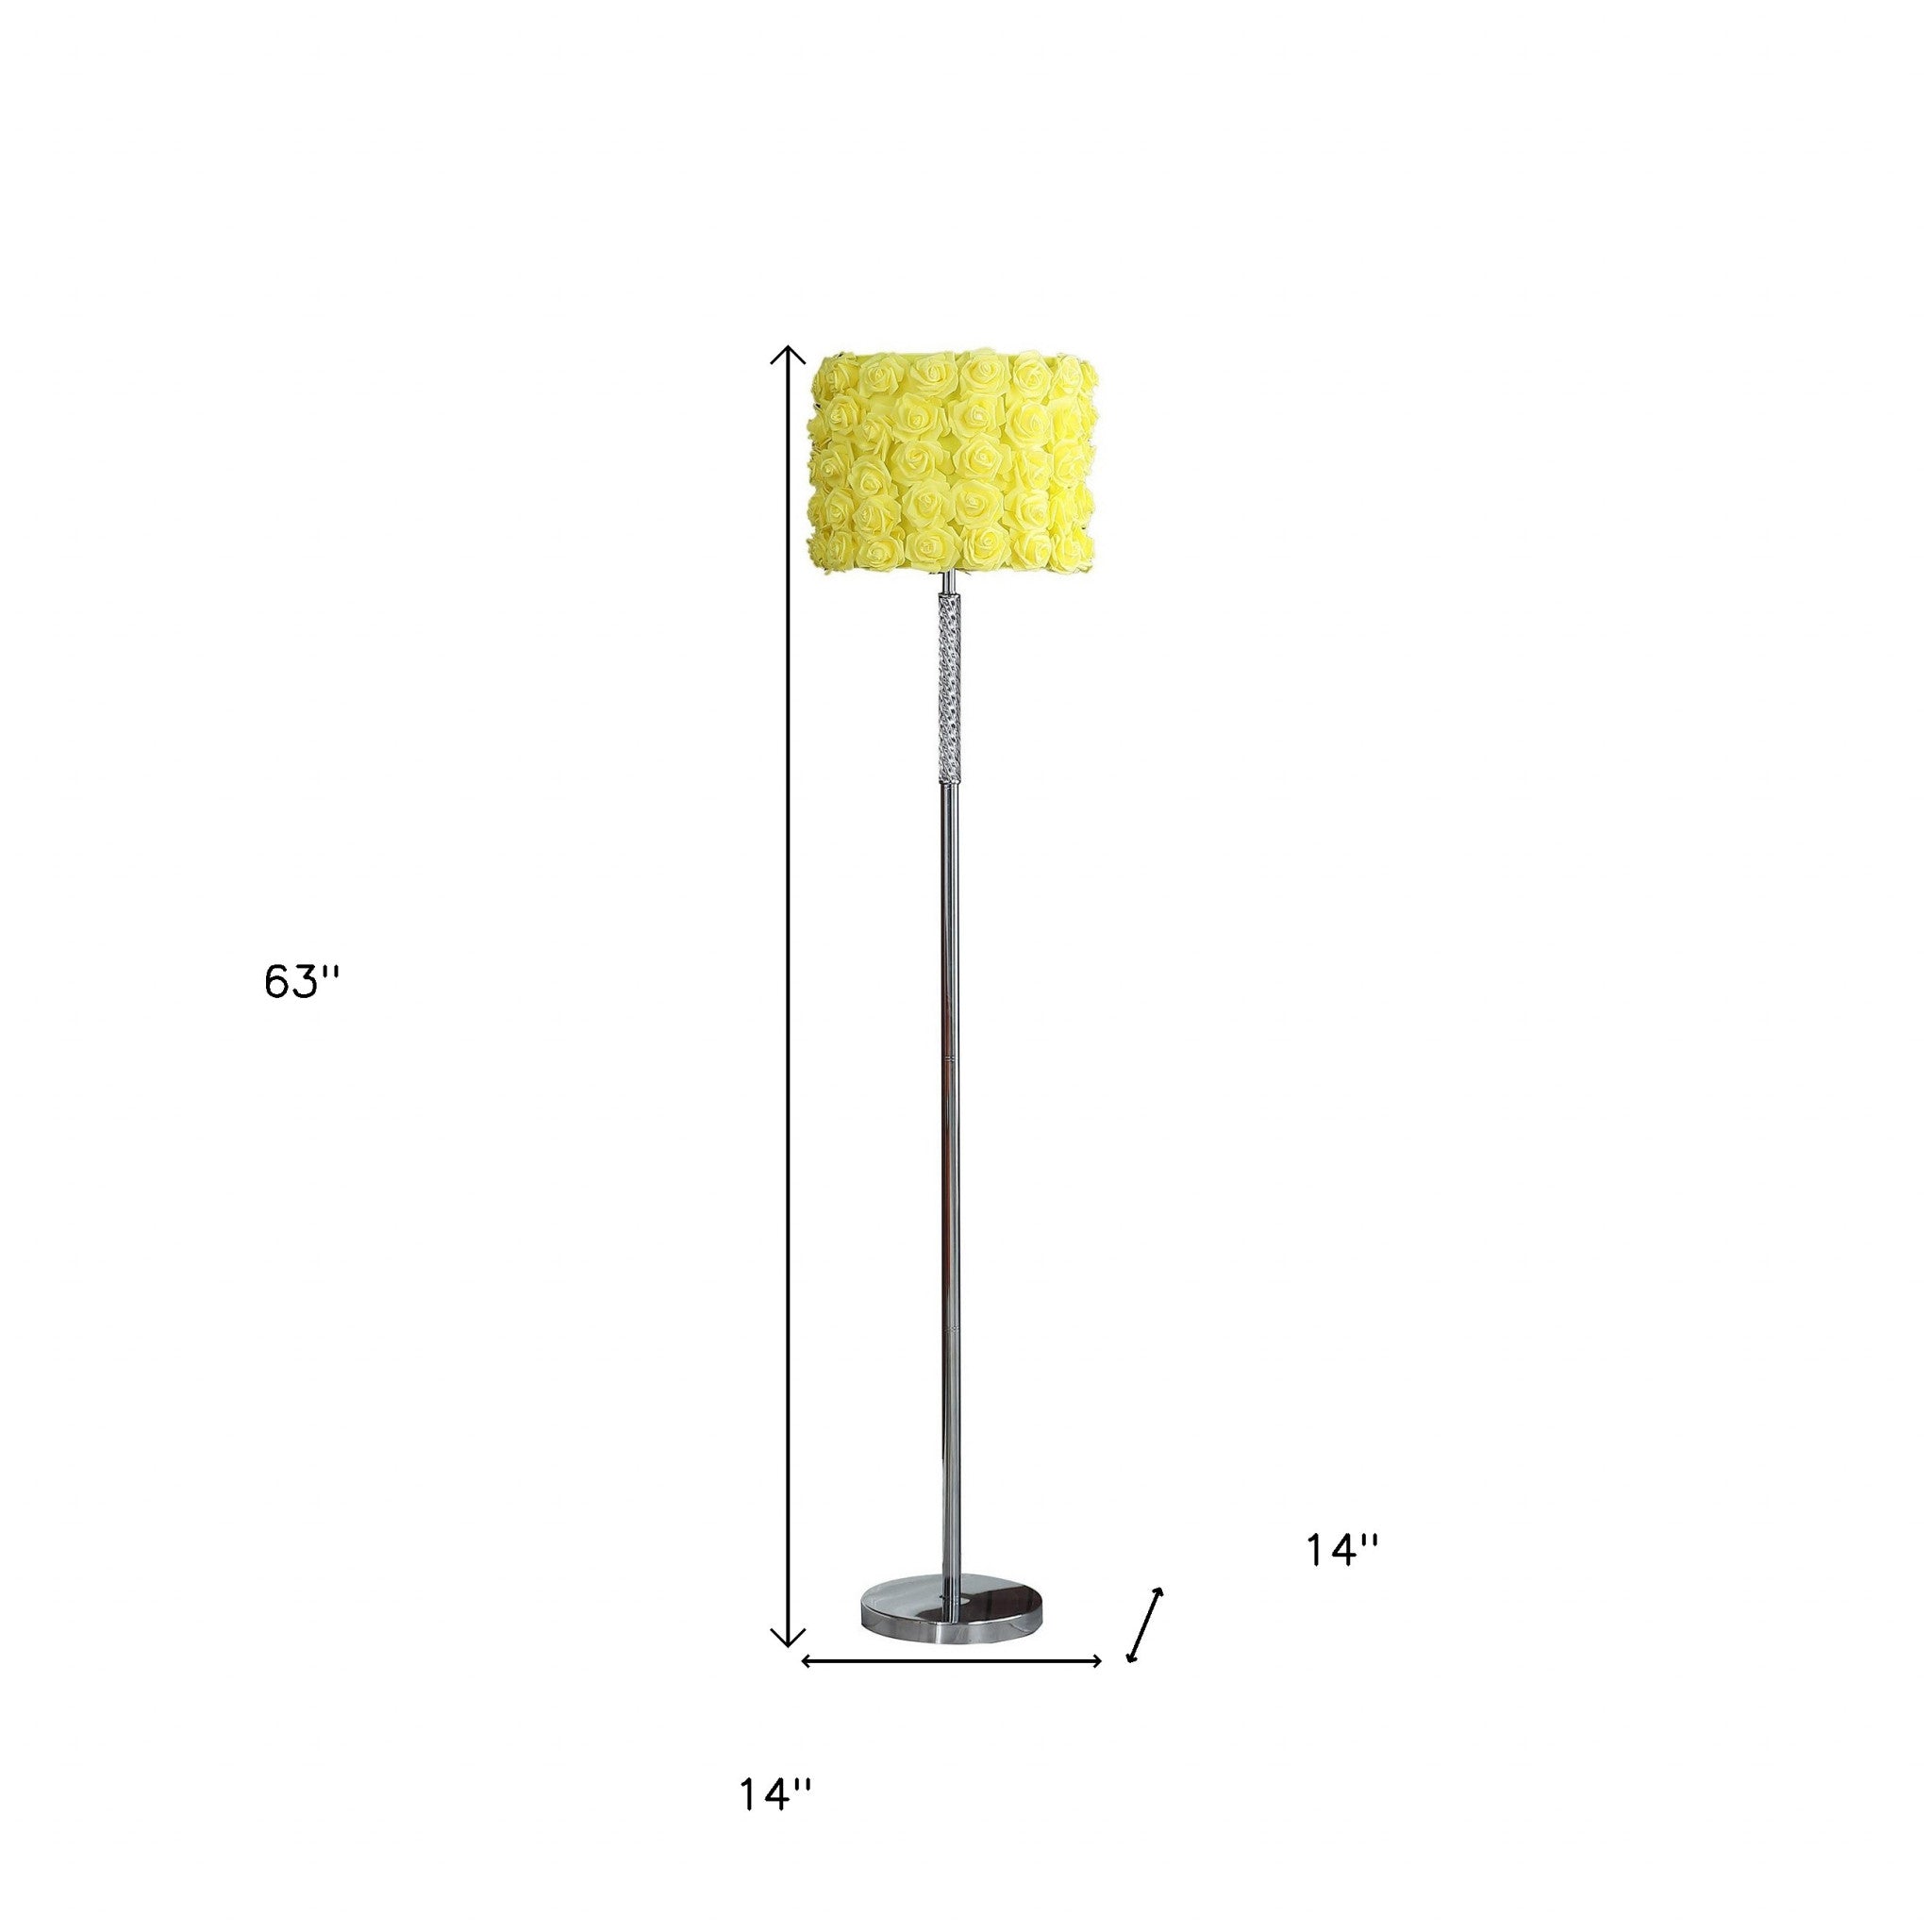 63" Steel and Acrylic Floor Lamp With Yellow Flowers Fabric Drum Shade